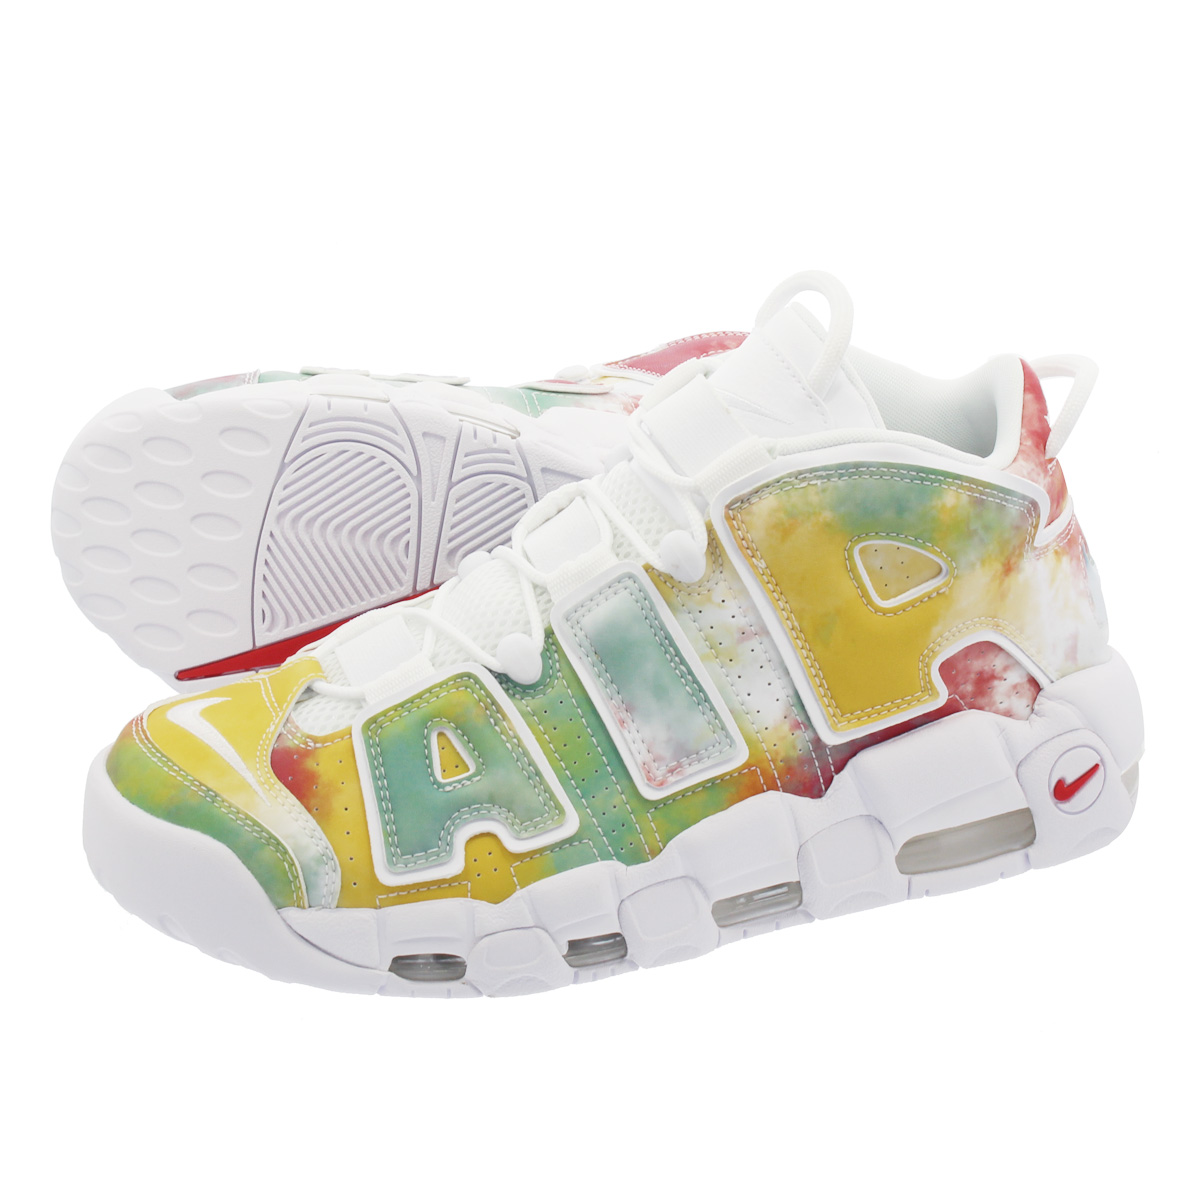 nike air more uptempo 96 uk cheap online